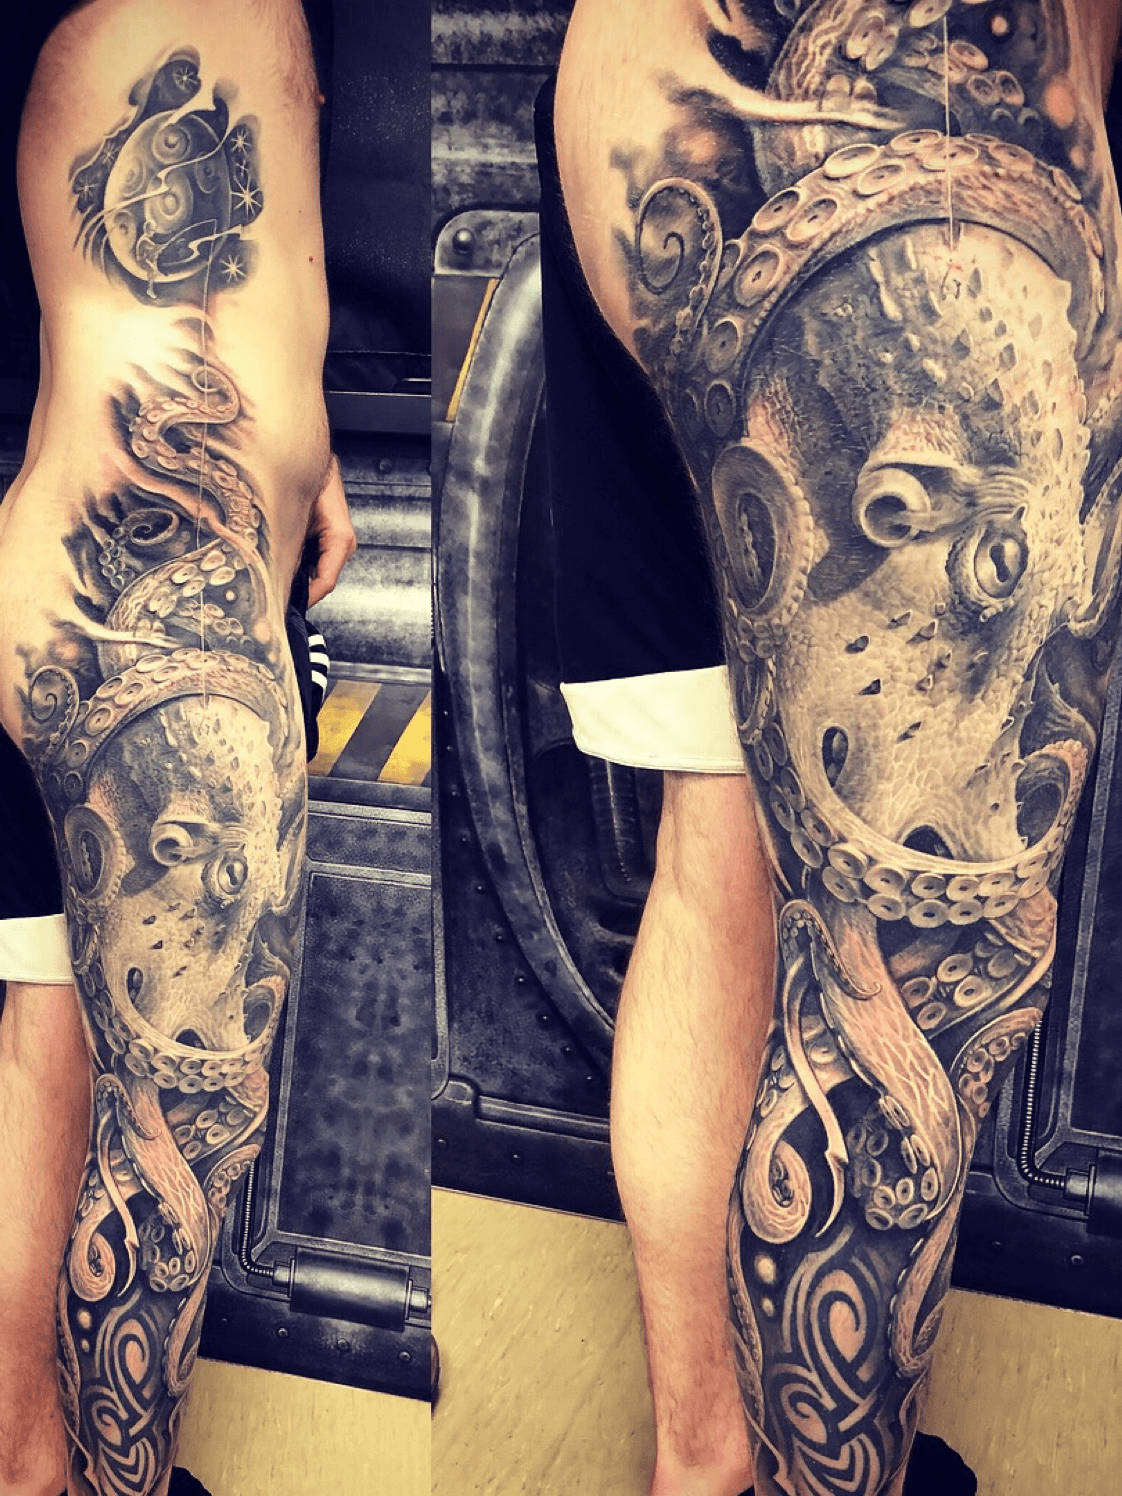 Majestic  octopus leg sleeve Done by lewhands Email  the shop at  timelesstattooyahoocom Or walkin noon to  pm everyday   Instagram